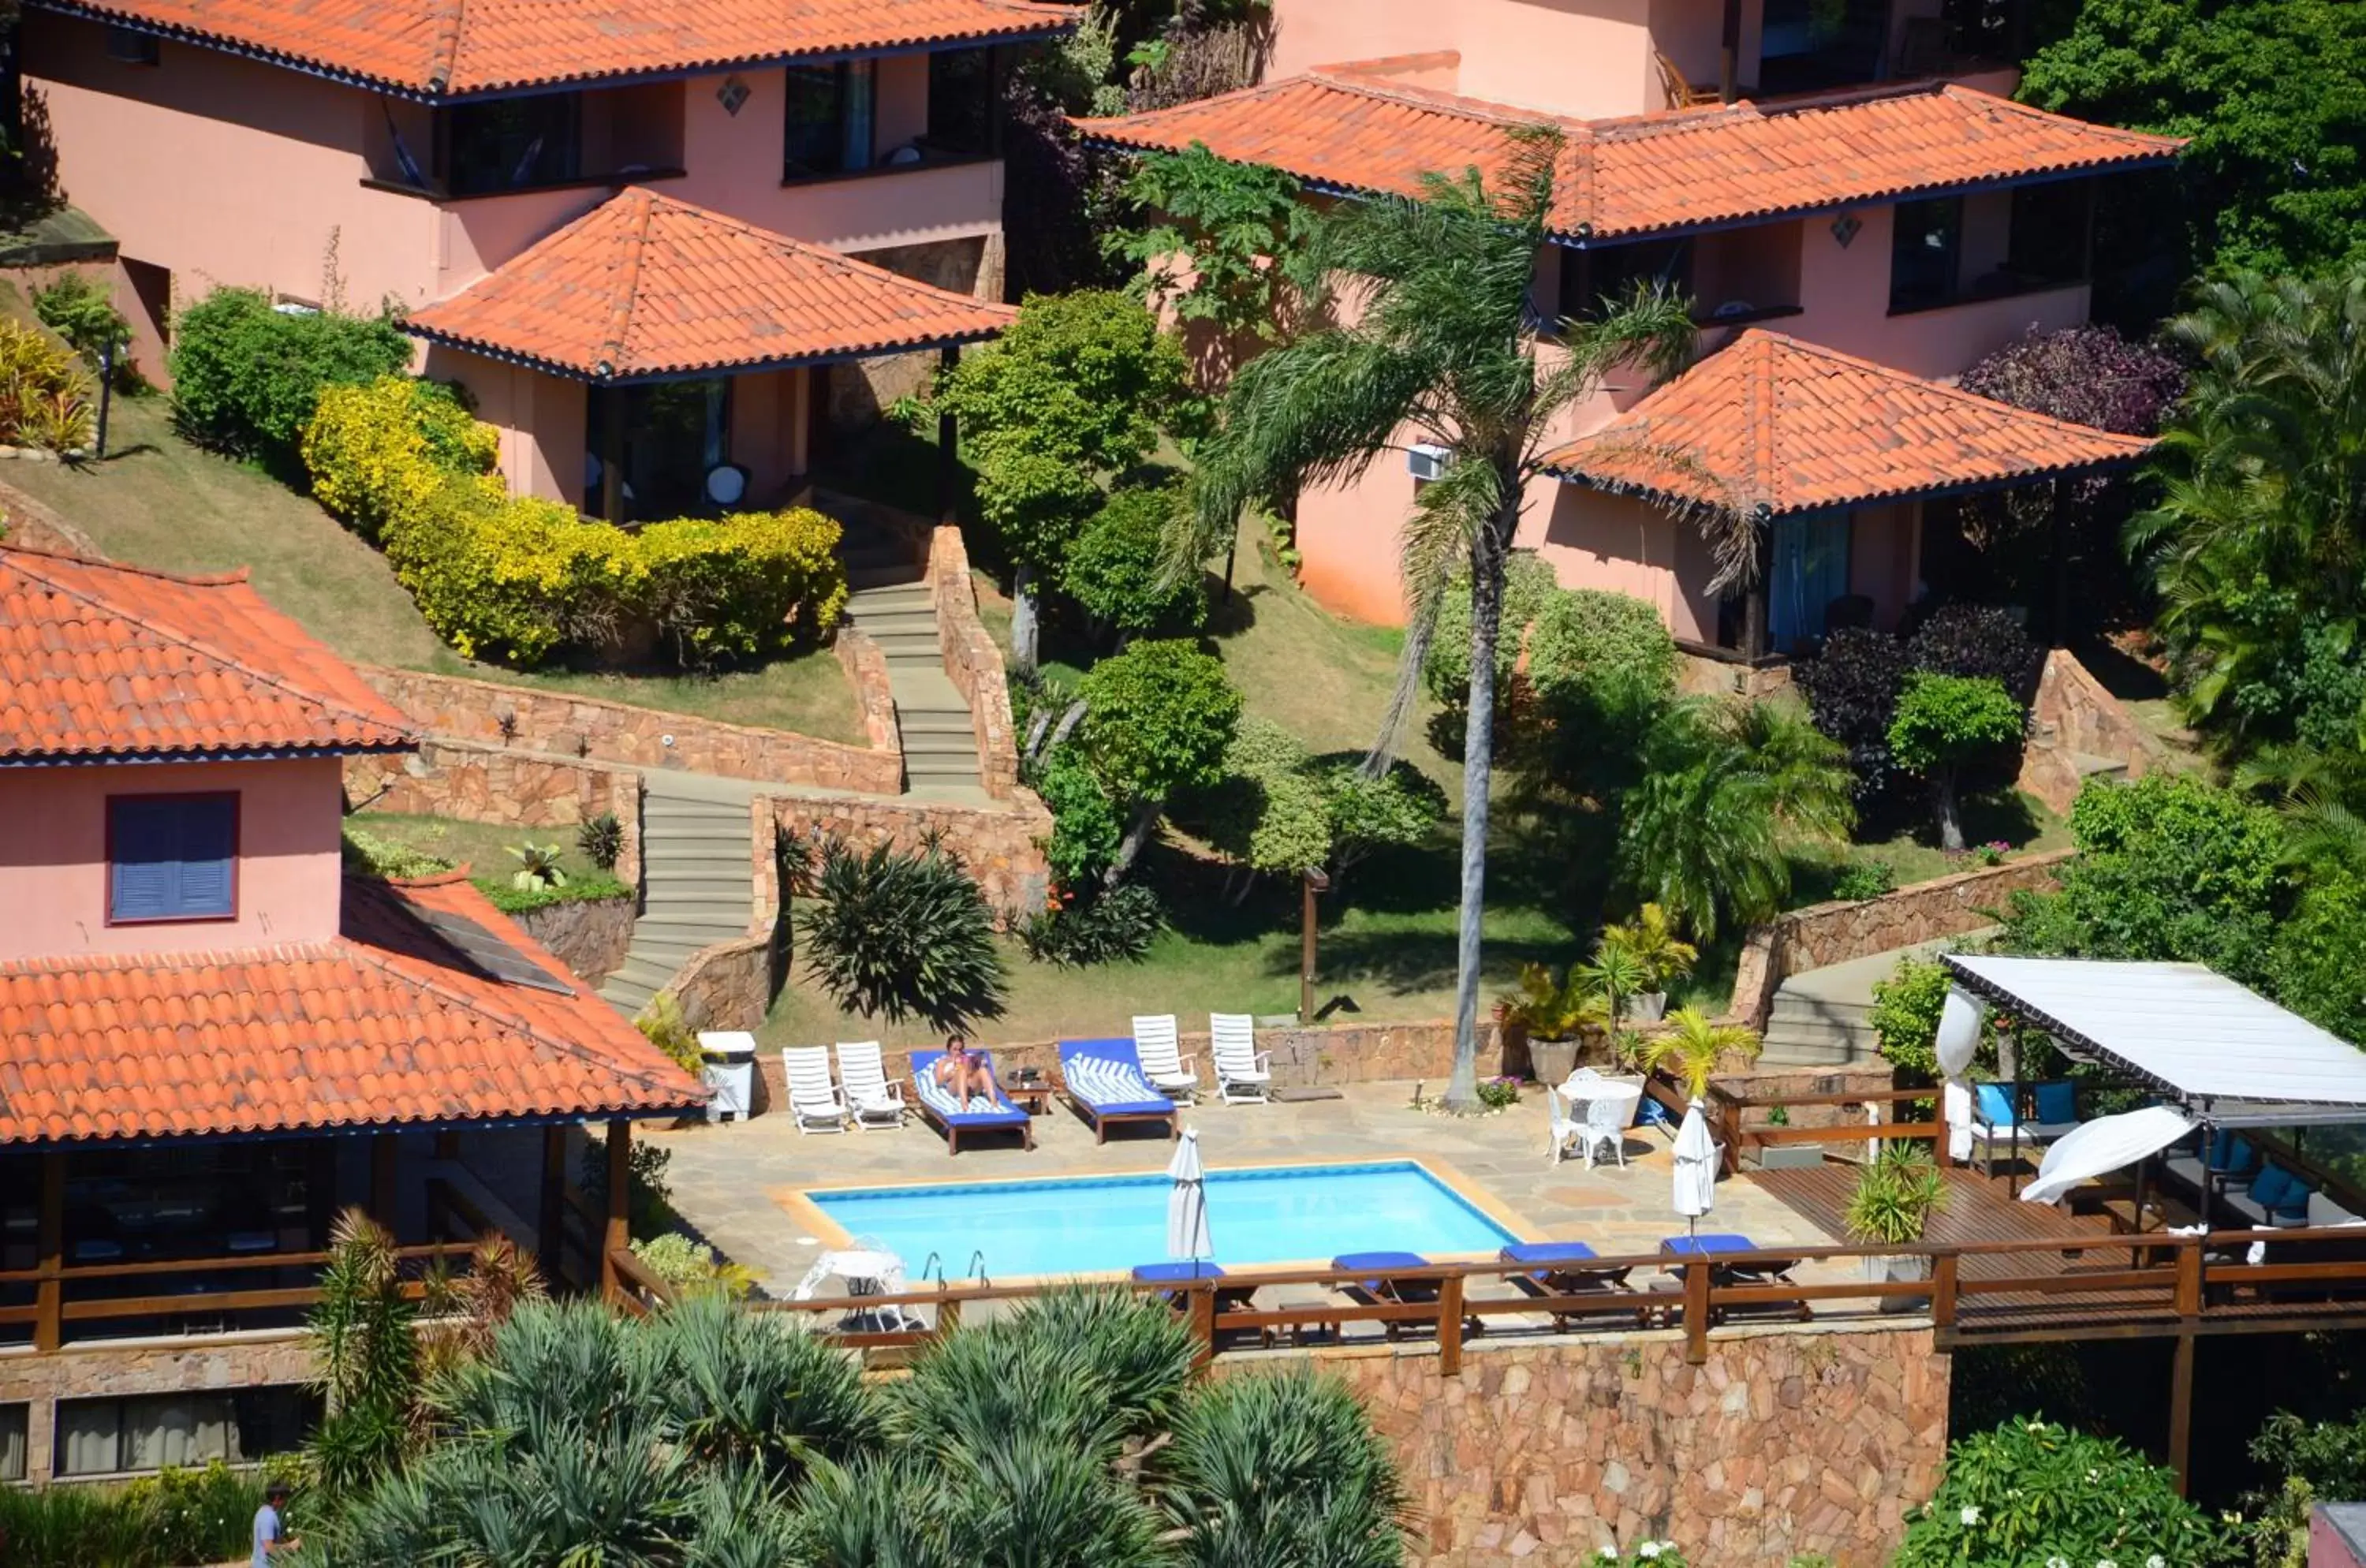 Property building, Pool View in Aguabúzios Hotel